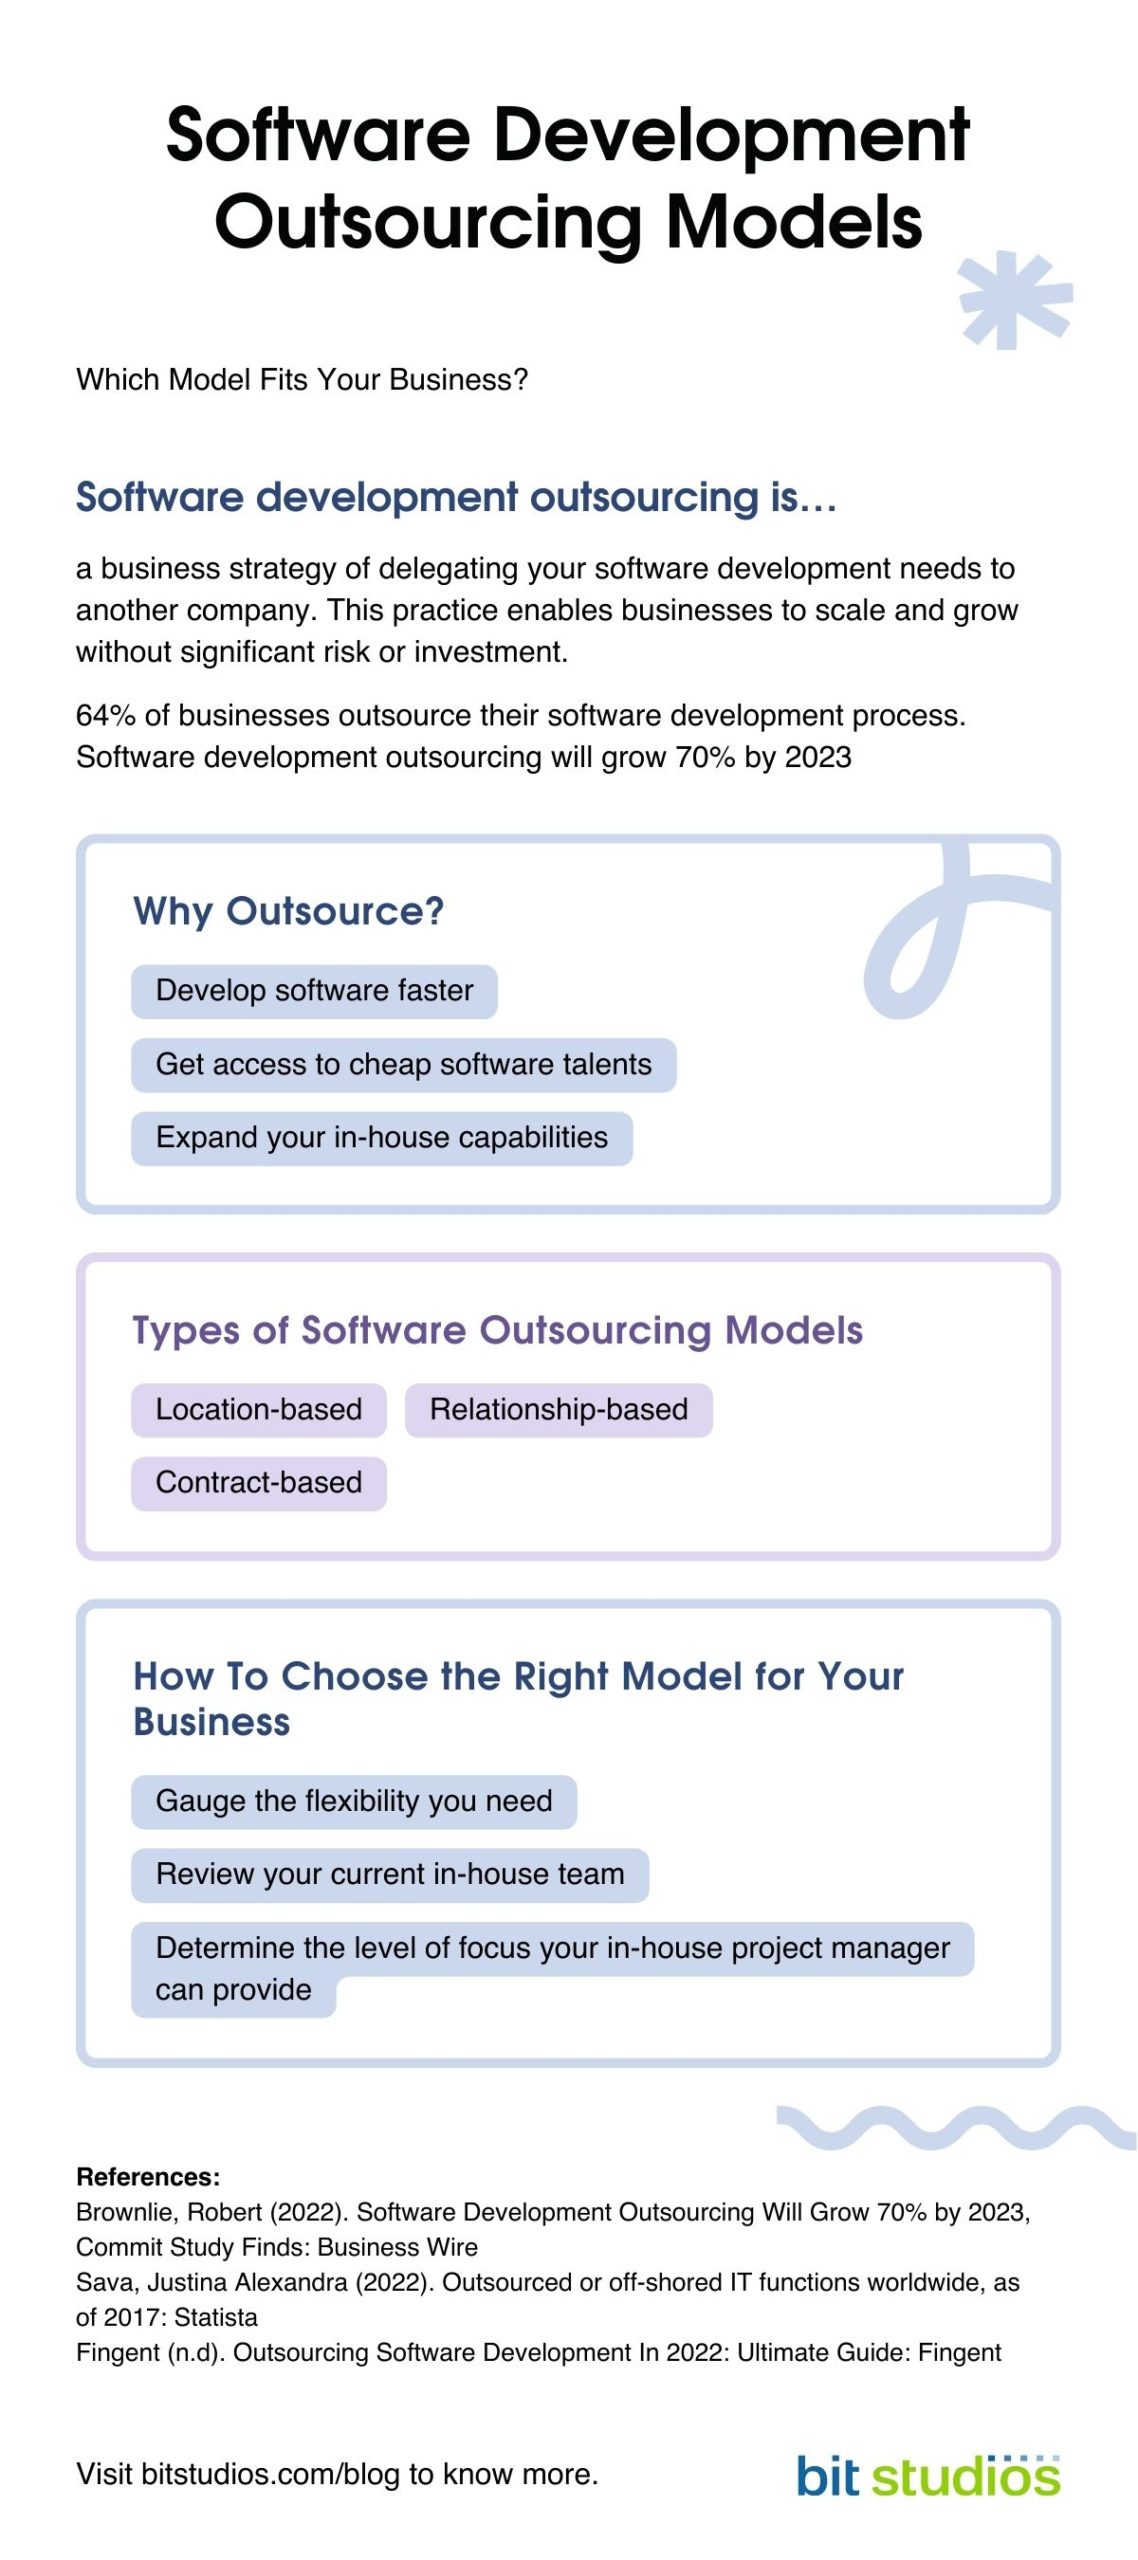 How to Choose the Software Development Outsourcing Model for Your Business